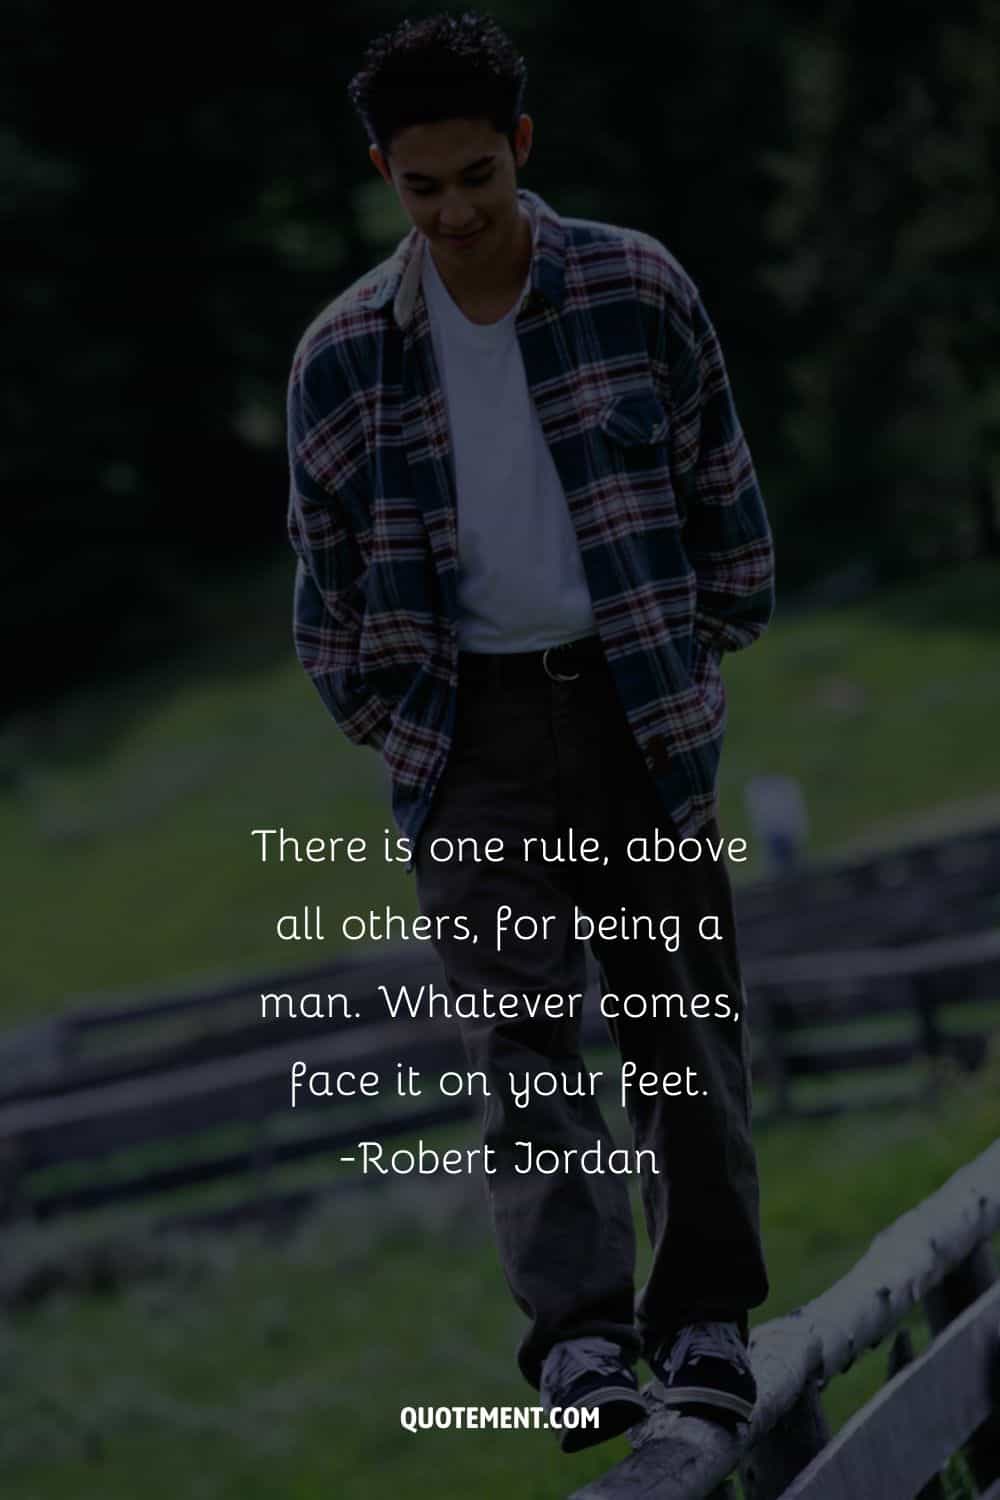 teenage boy image representing inspirational quote for teen boys